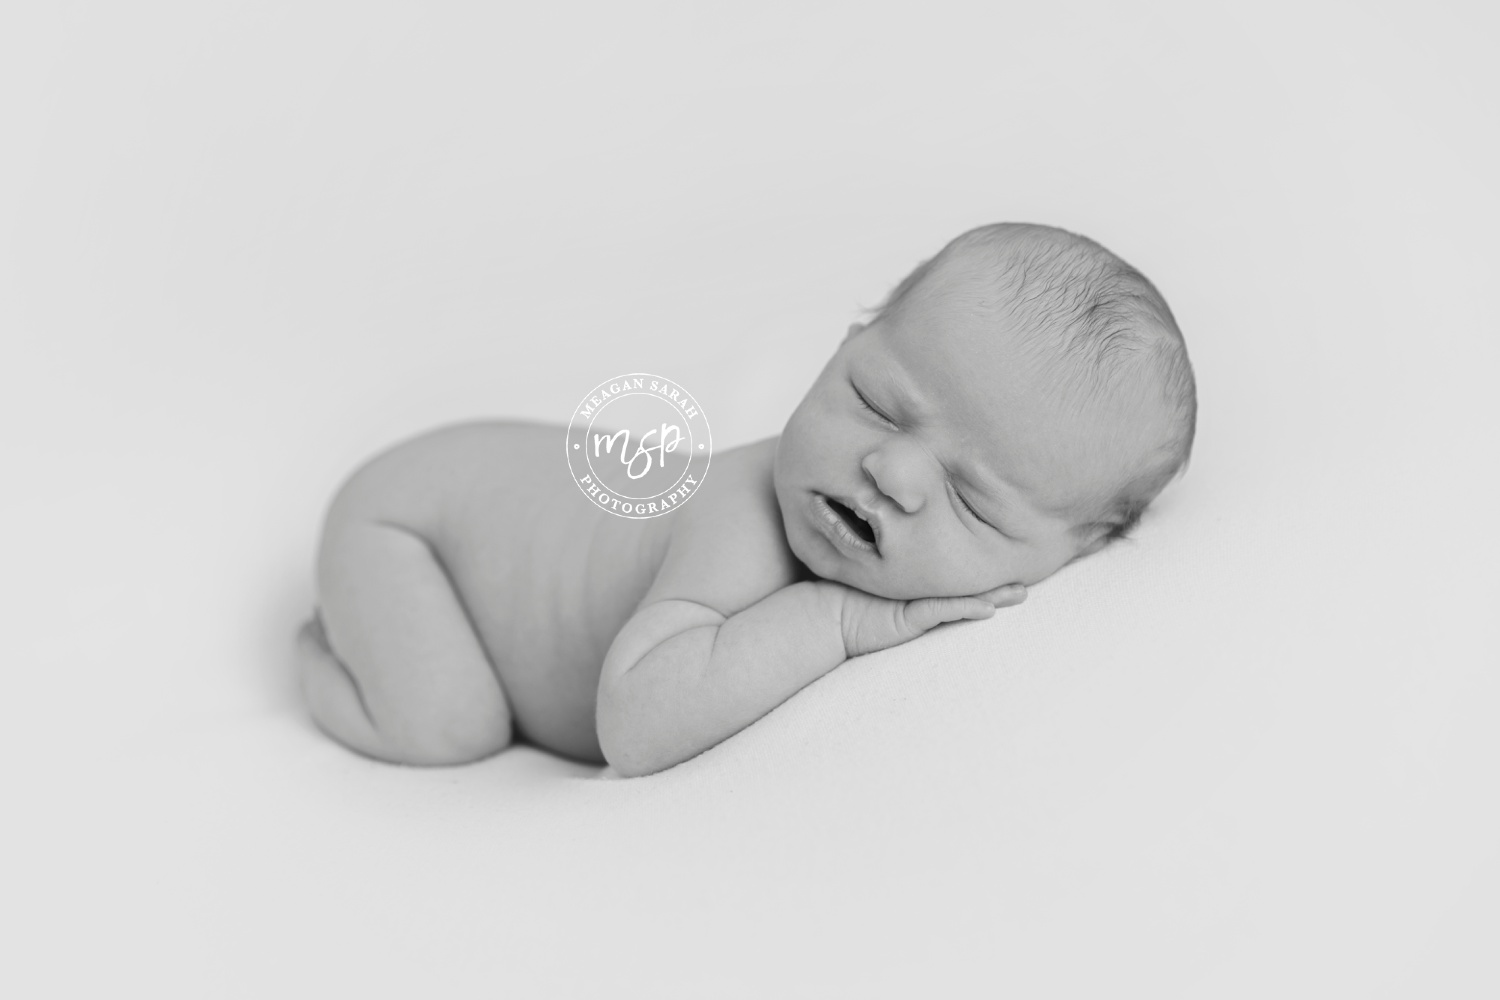 Black and White,PHOTOGRAPHER,Katie Louise Williams,Meagan Sarah Pope,Horsforth Leeds Photographer,Horsforth Photographer,Leeds Photographer,Meagan Sarah Photography,Professional Photographer in Leeds,West Yorkshire Photographer,Sex of Baby,Girl,Horsforth Newborn Photography,Leeds Baby Photographer,Leeds Newborn Photographer,Newborn Babies,Newborn Photographer,Newborn Photography,Photos of Babies,Photos of Newborns,Yorkshire Newborn Photographer,Yorkshire Newborn Photography,Front,